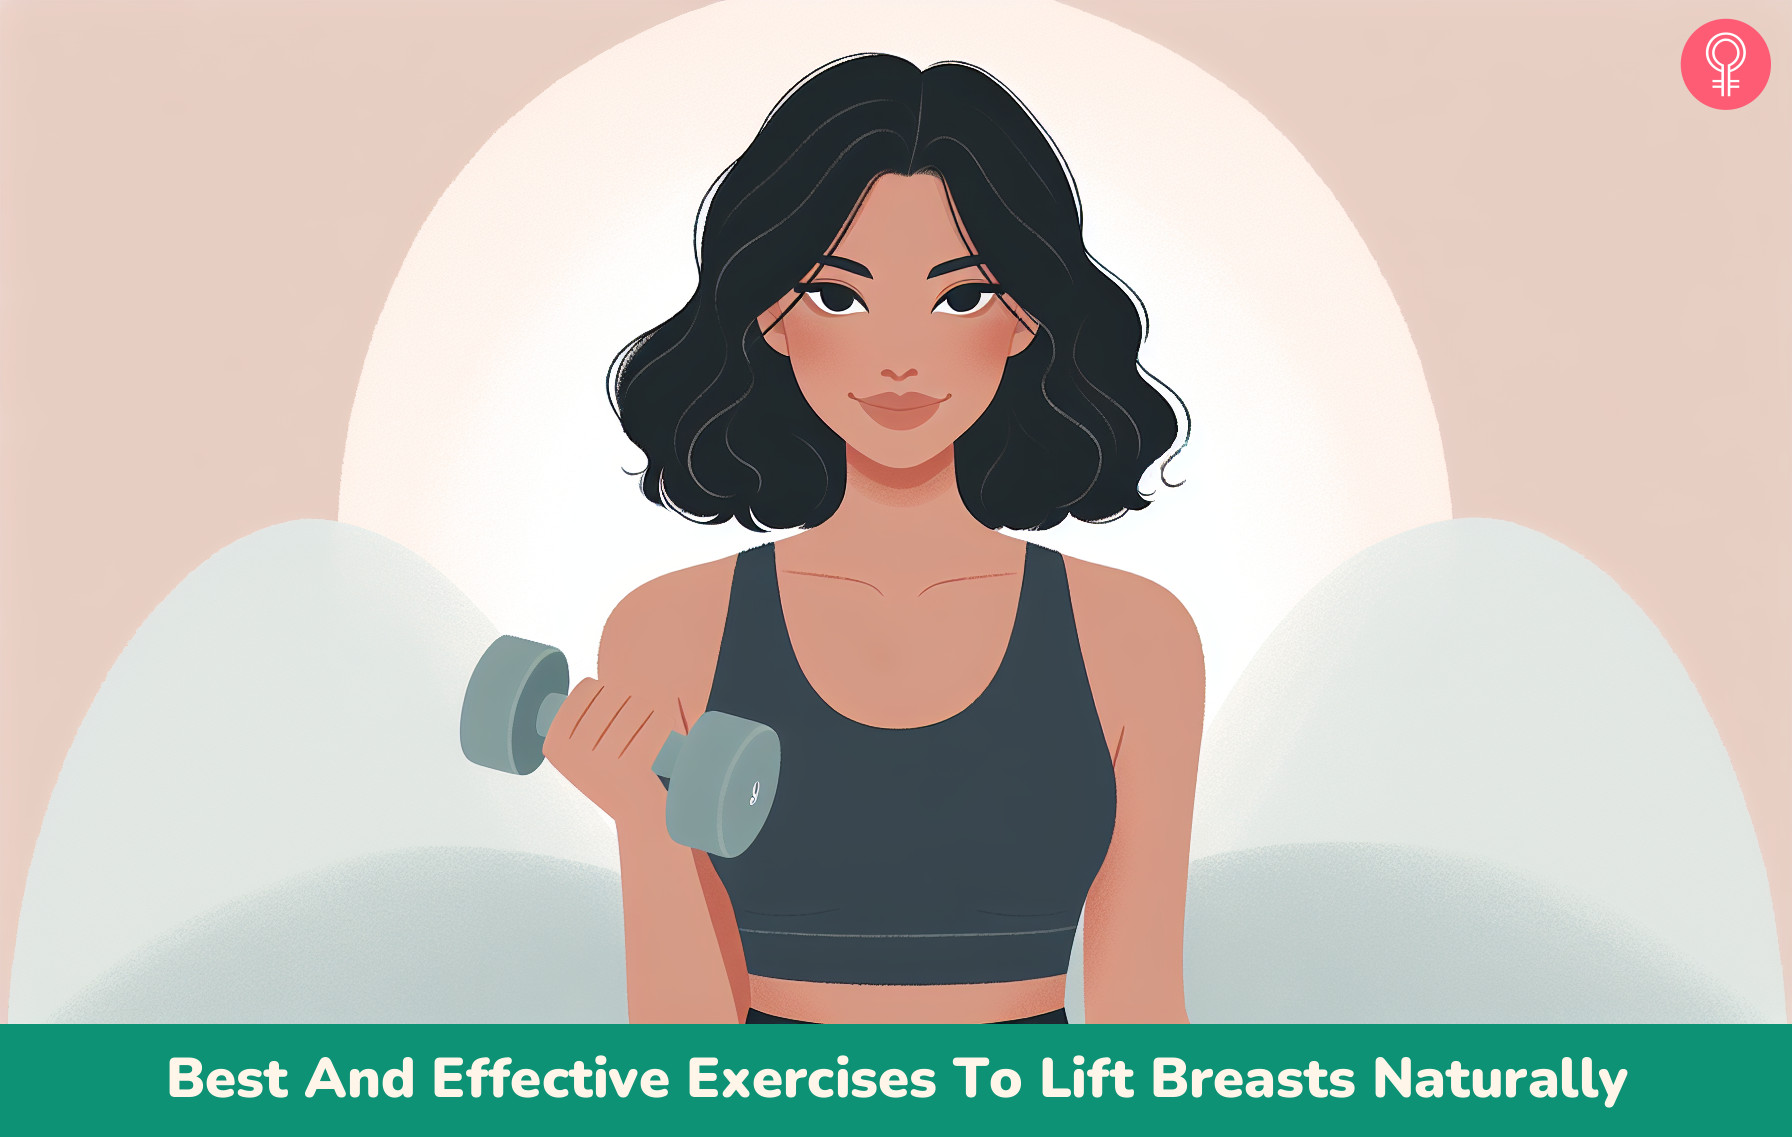 10 Best Exercises To Lift Breasts, Strengthen Chest, From A Trainer